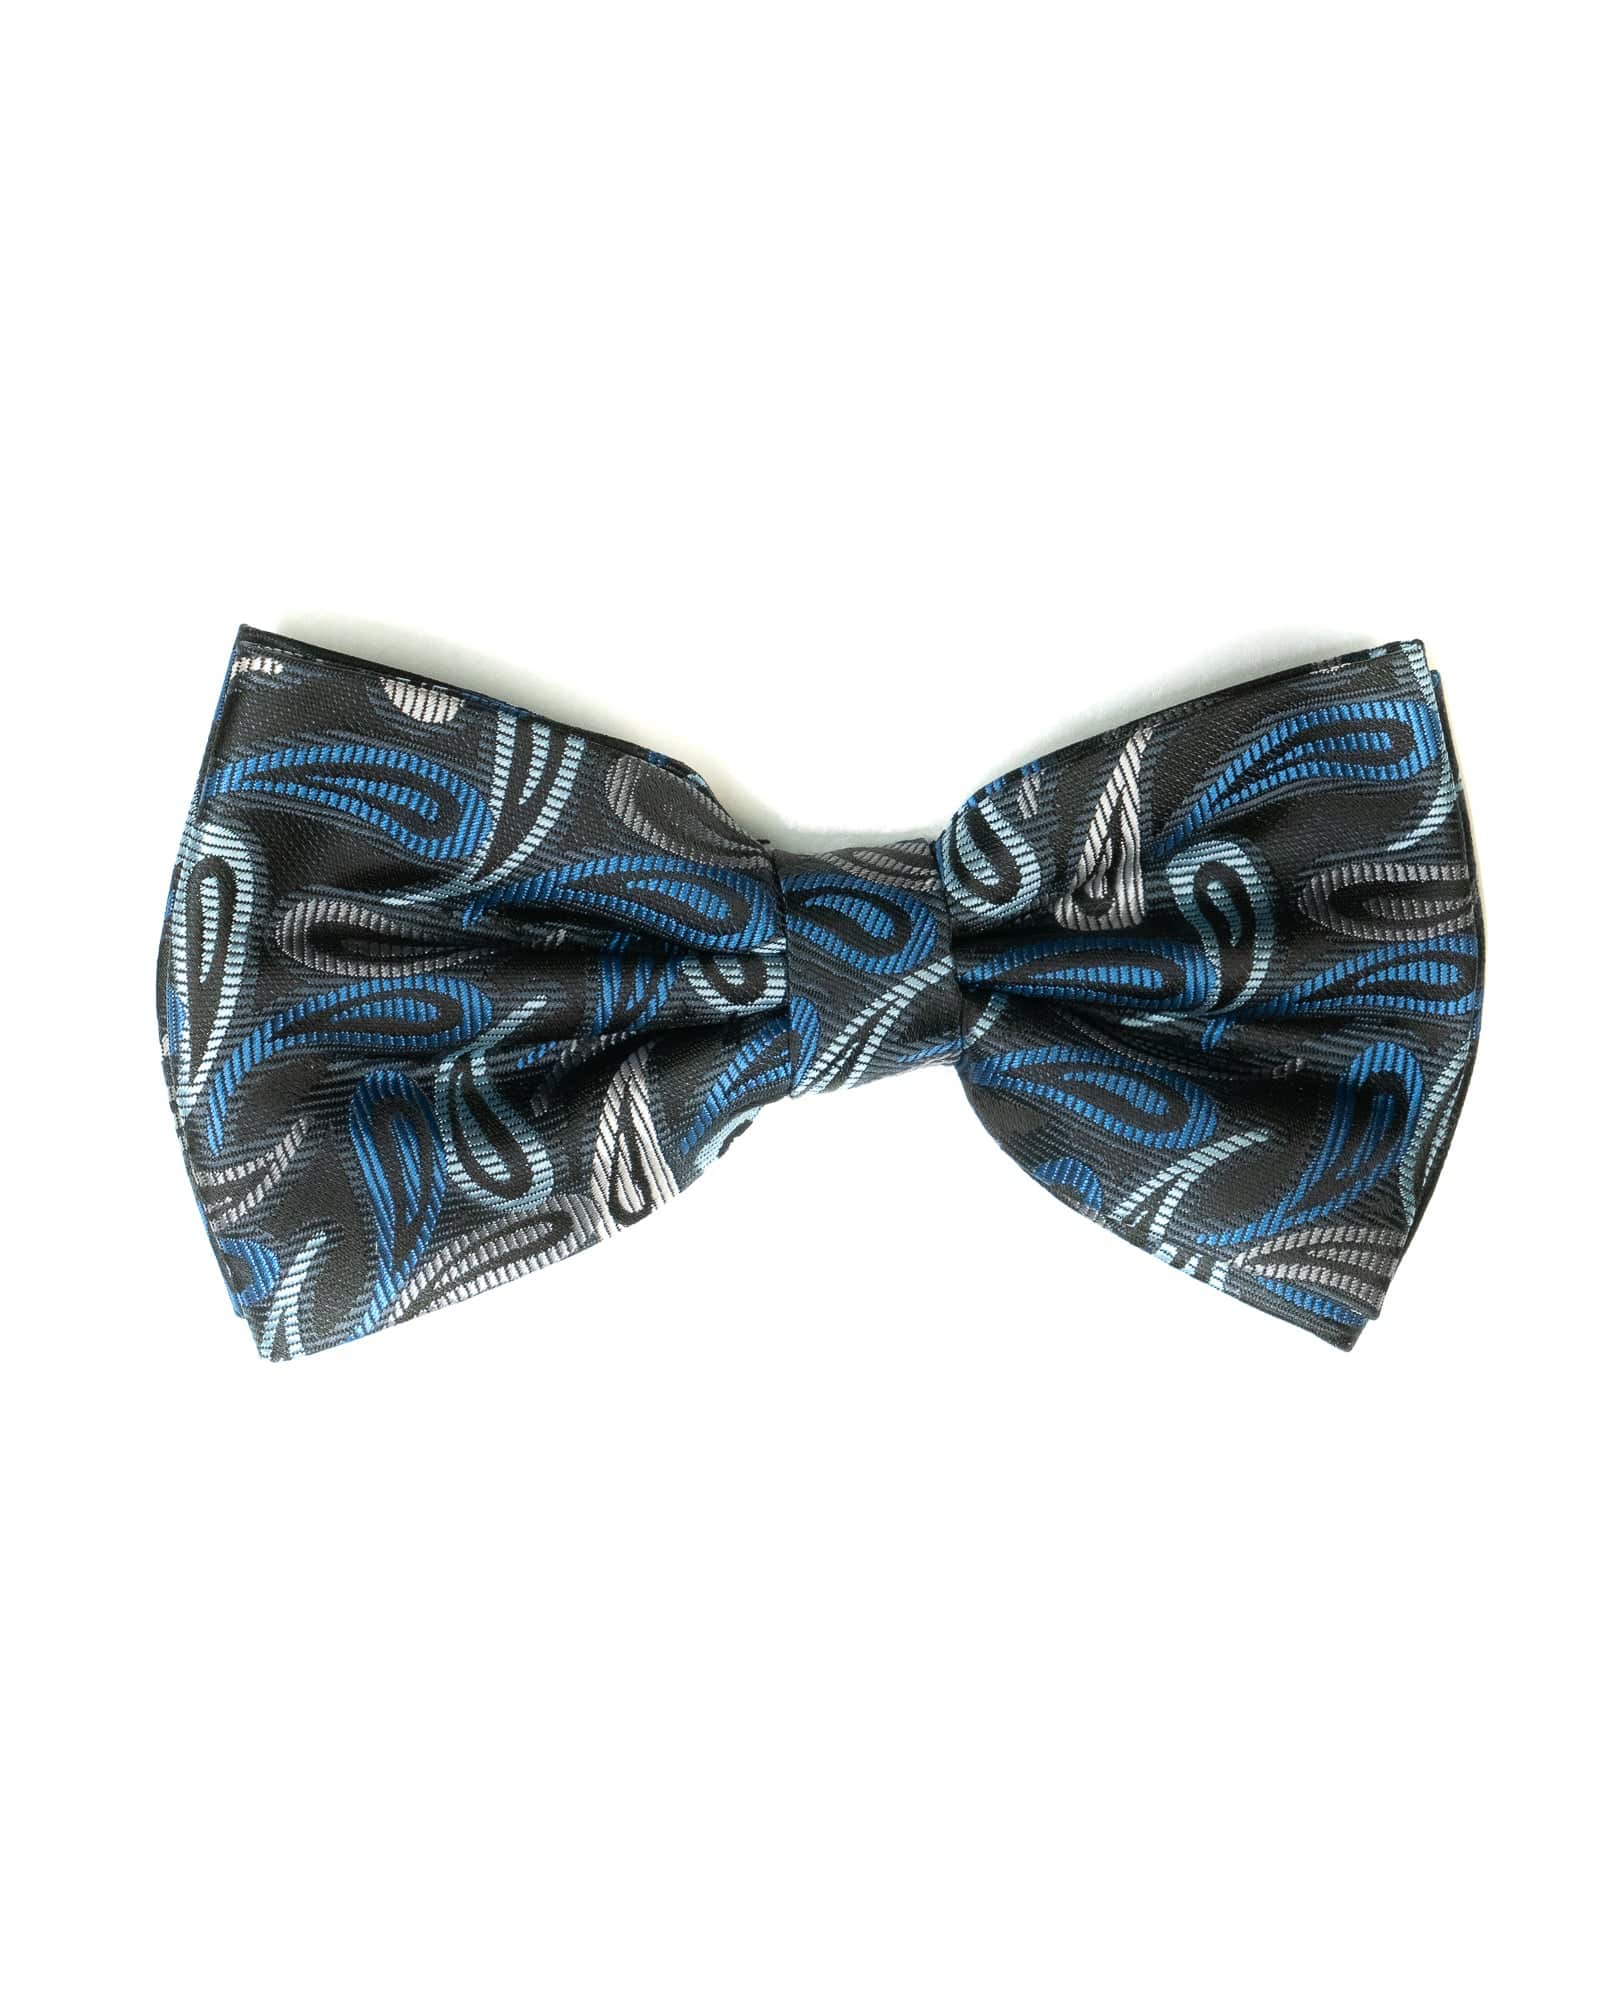 Bow Tie Paisley In Black & Blue - Rainwater's Men's Clothing and Tuxedo Rental